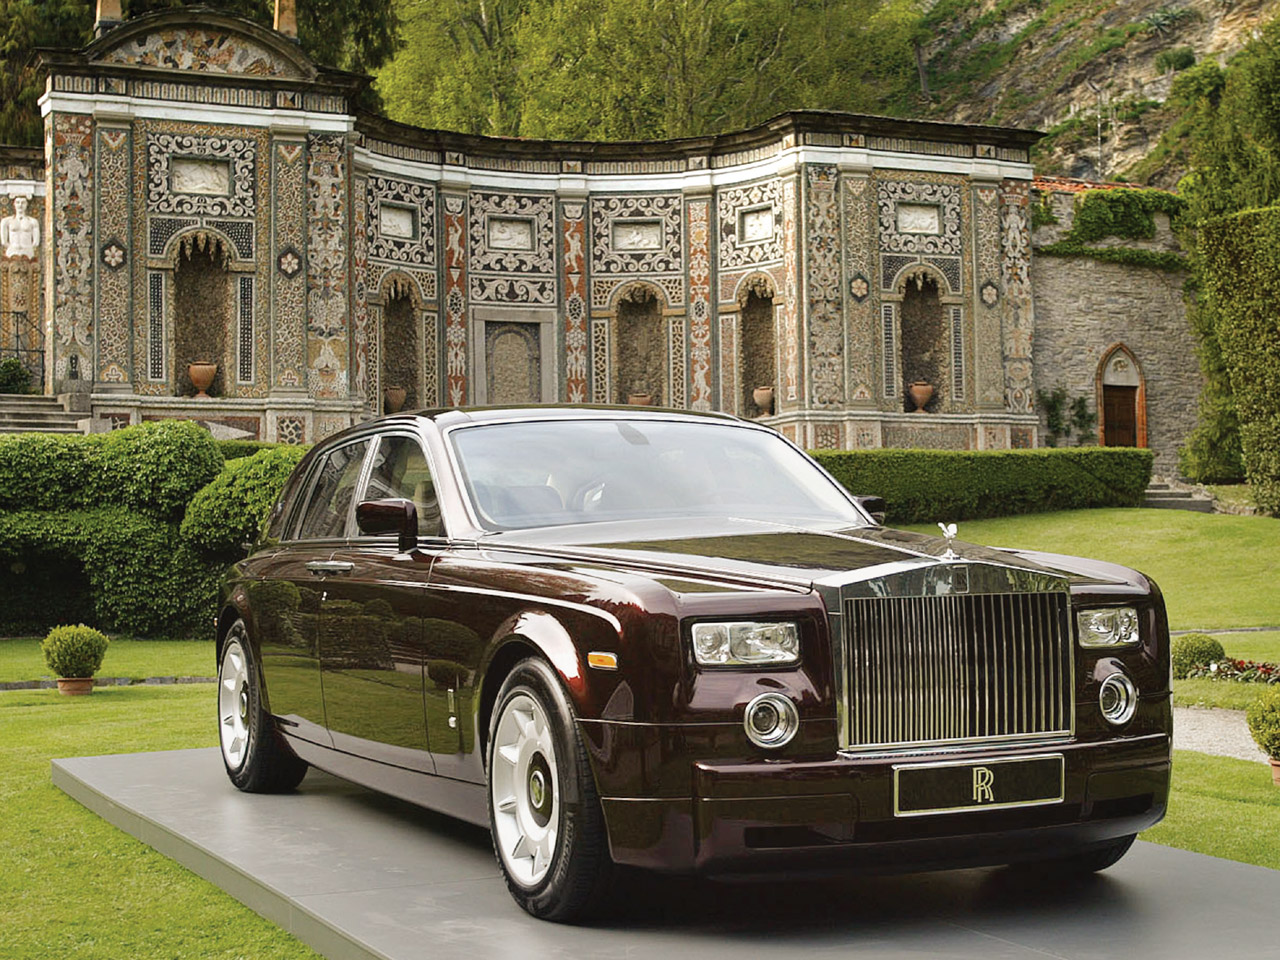 Rolls Royce Phantom Concours Italy 1280x960 655x491 Ultimate Rolls Royce with 9.0 liter V16 engine